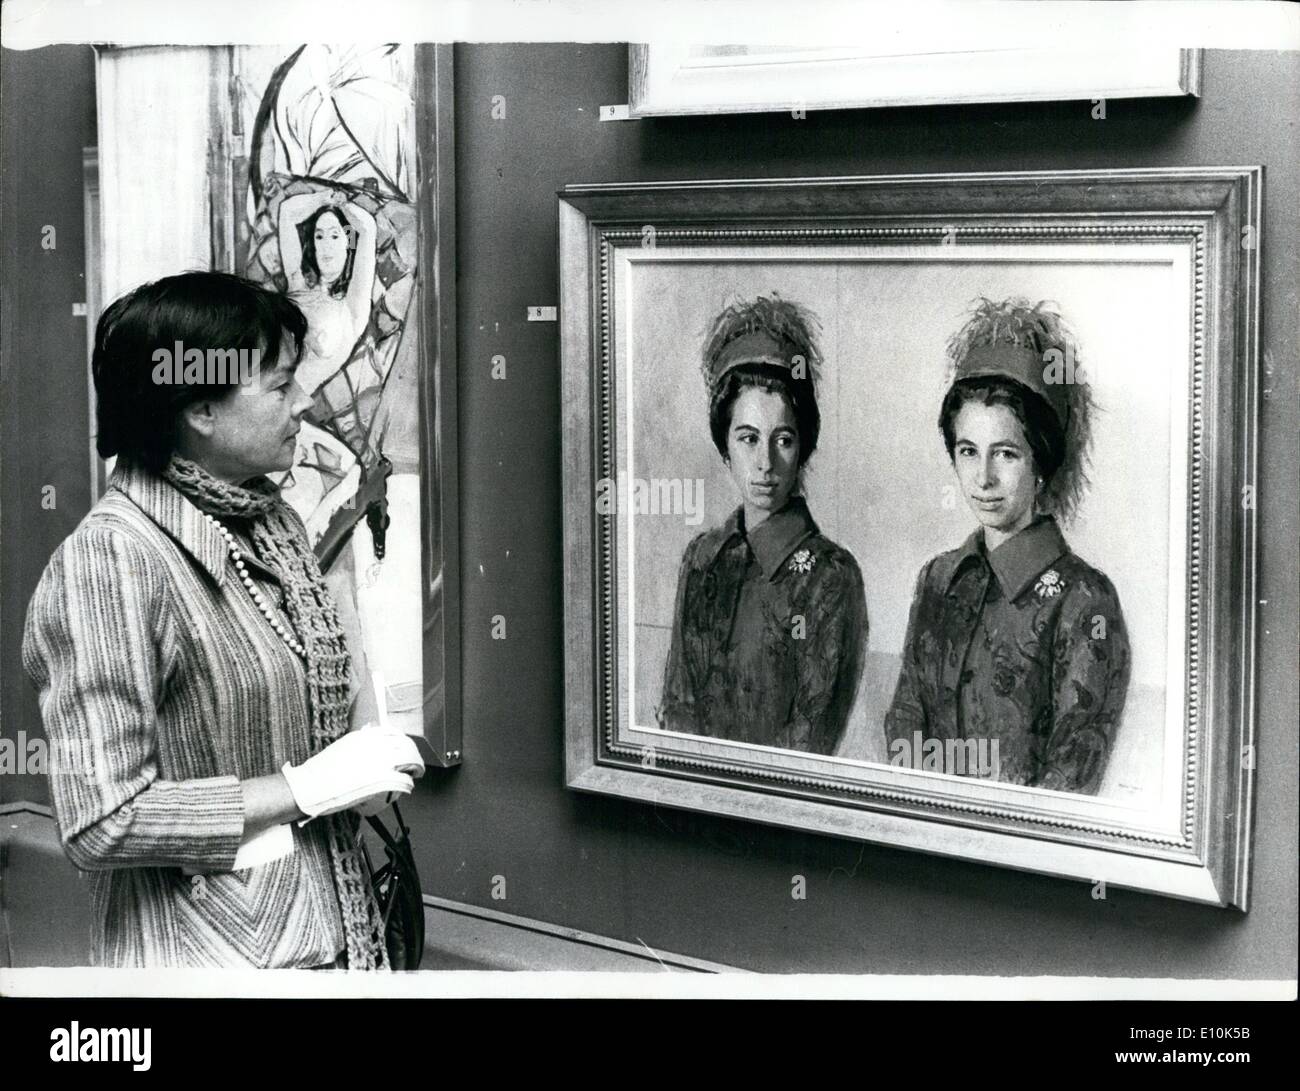 May 05, 1973 - Royal Academy Summer Exhibition: The Royal Academy summer Exhibition 1973 opens to the public tomorrow (May 5). Photo shows A visitor to the gallery looks at a double portrait of Princess Anne, by Michael Noakes. Stock Photo